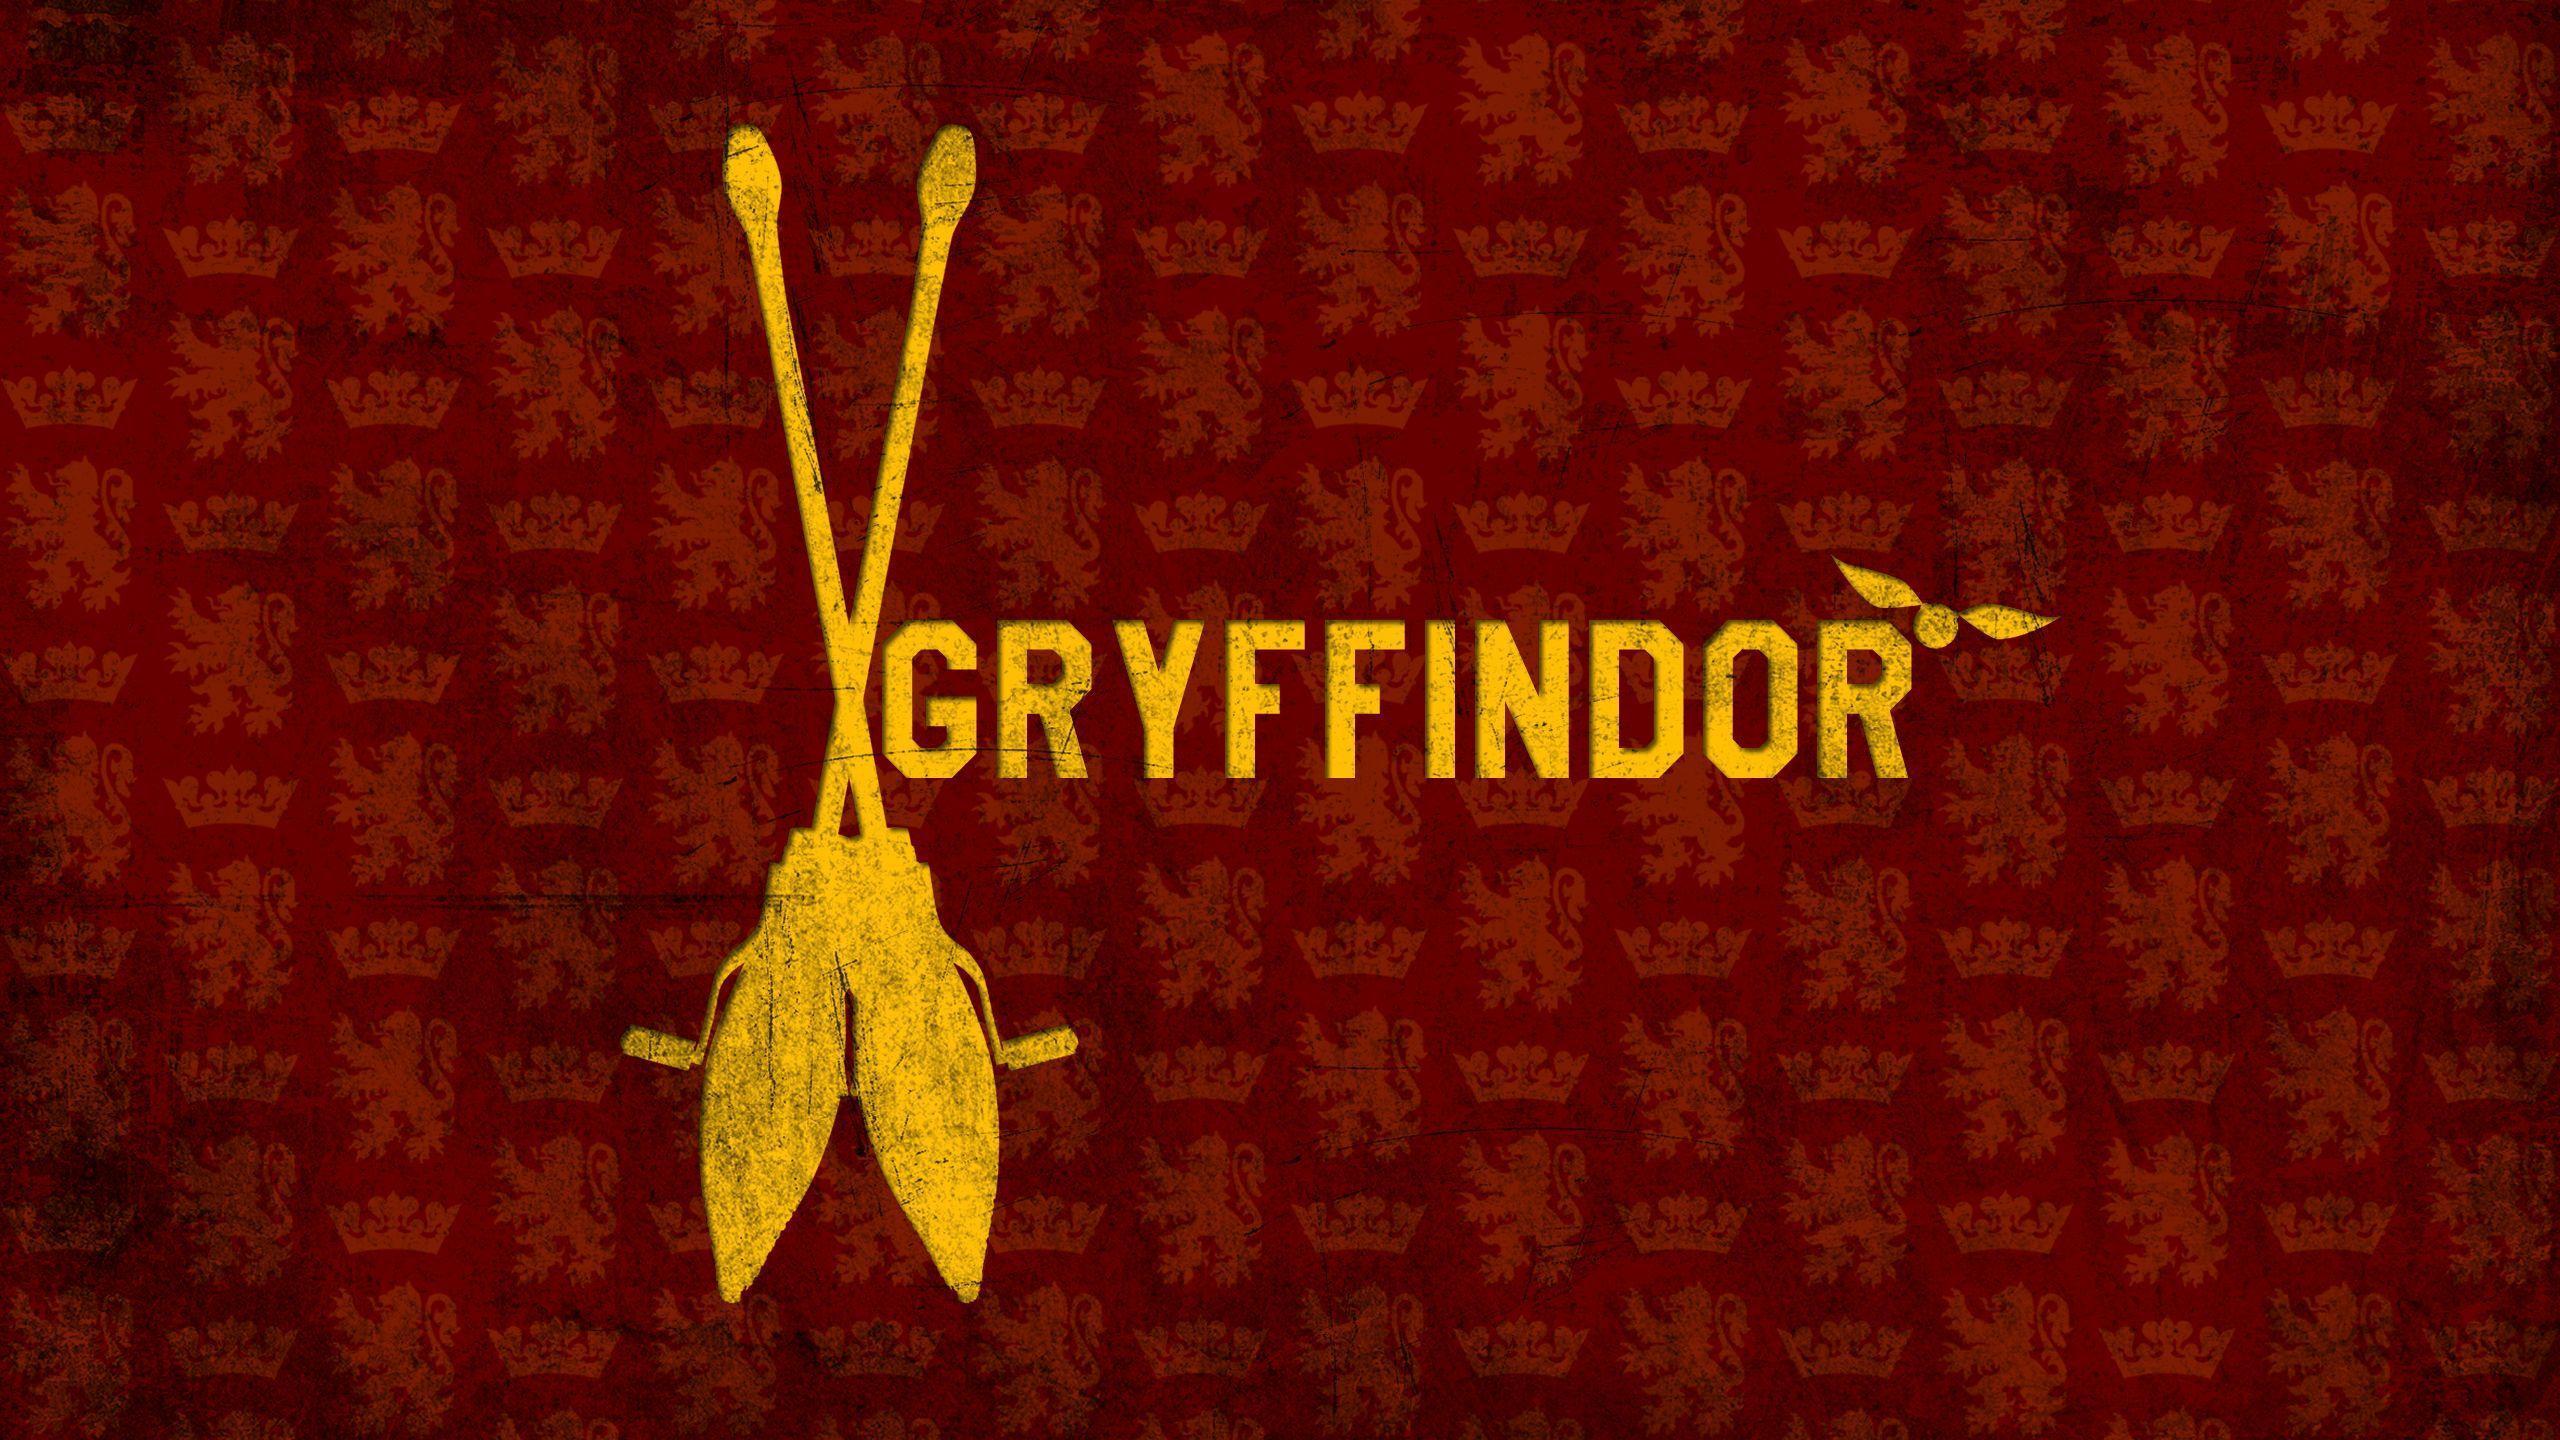 6 Gryffindor HD Wallpapers